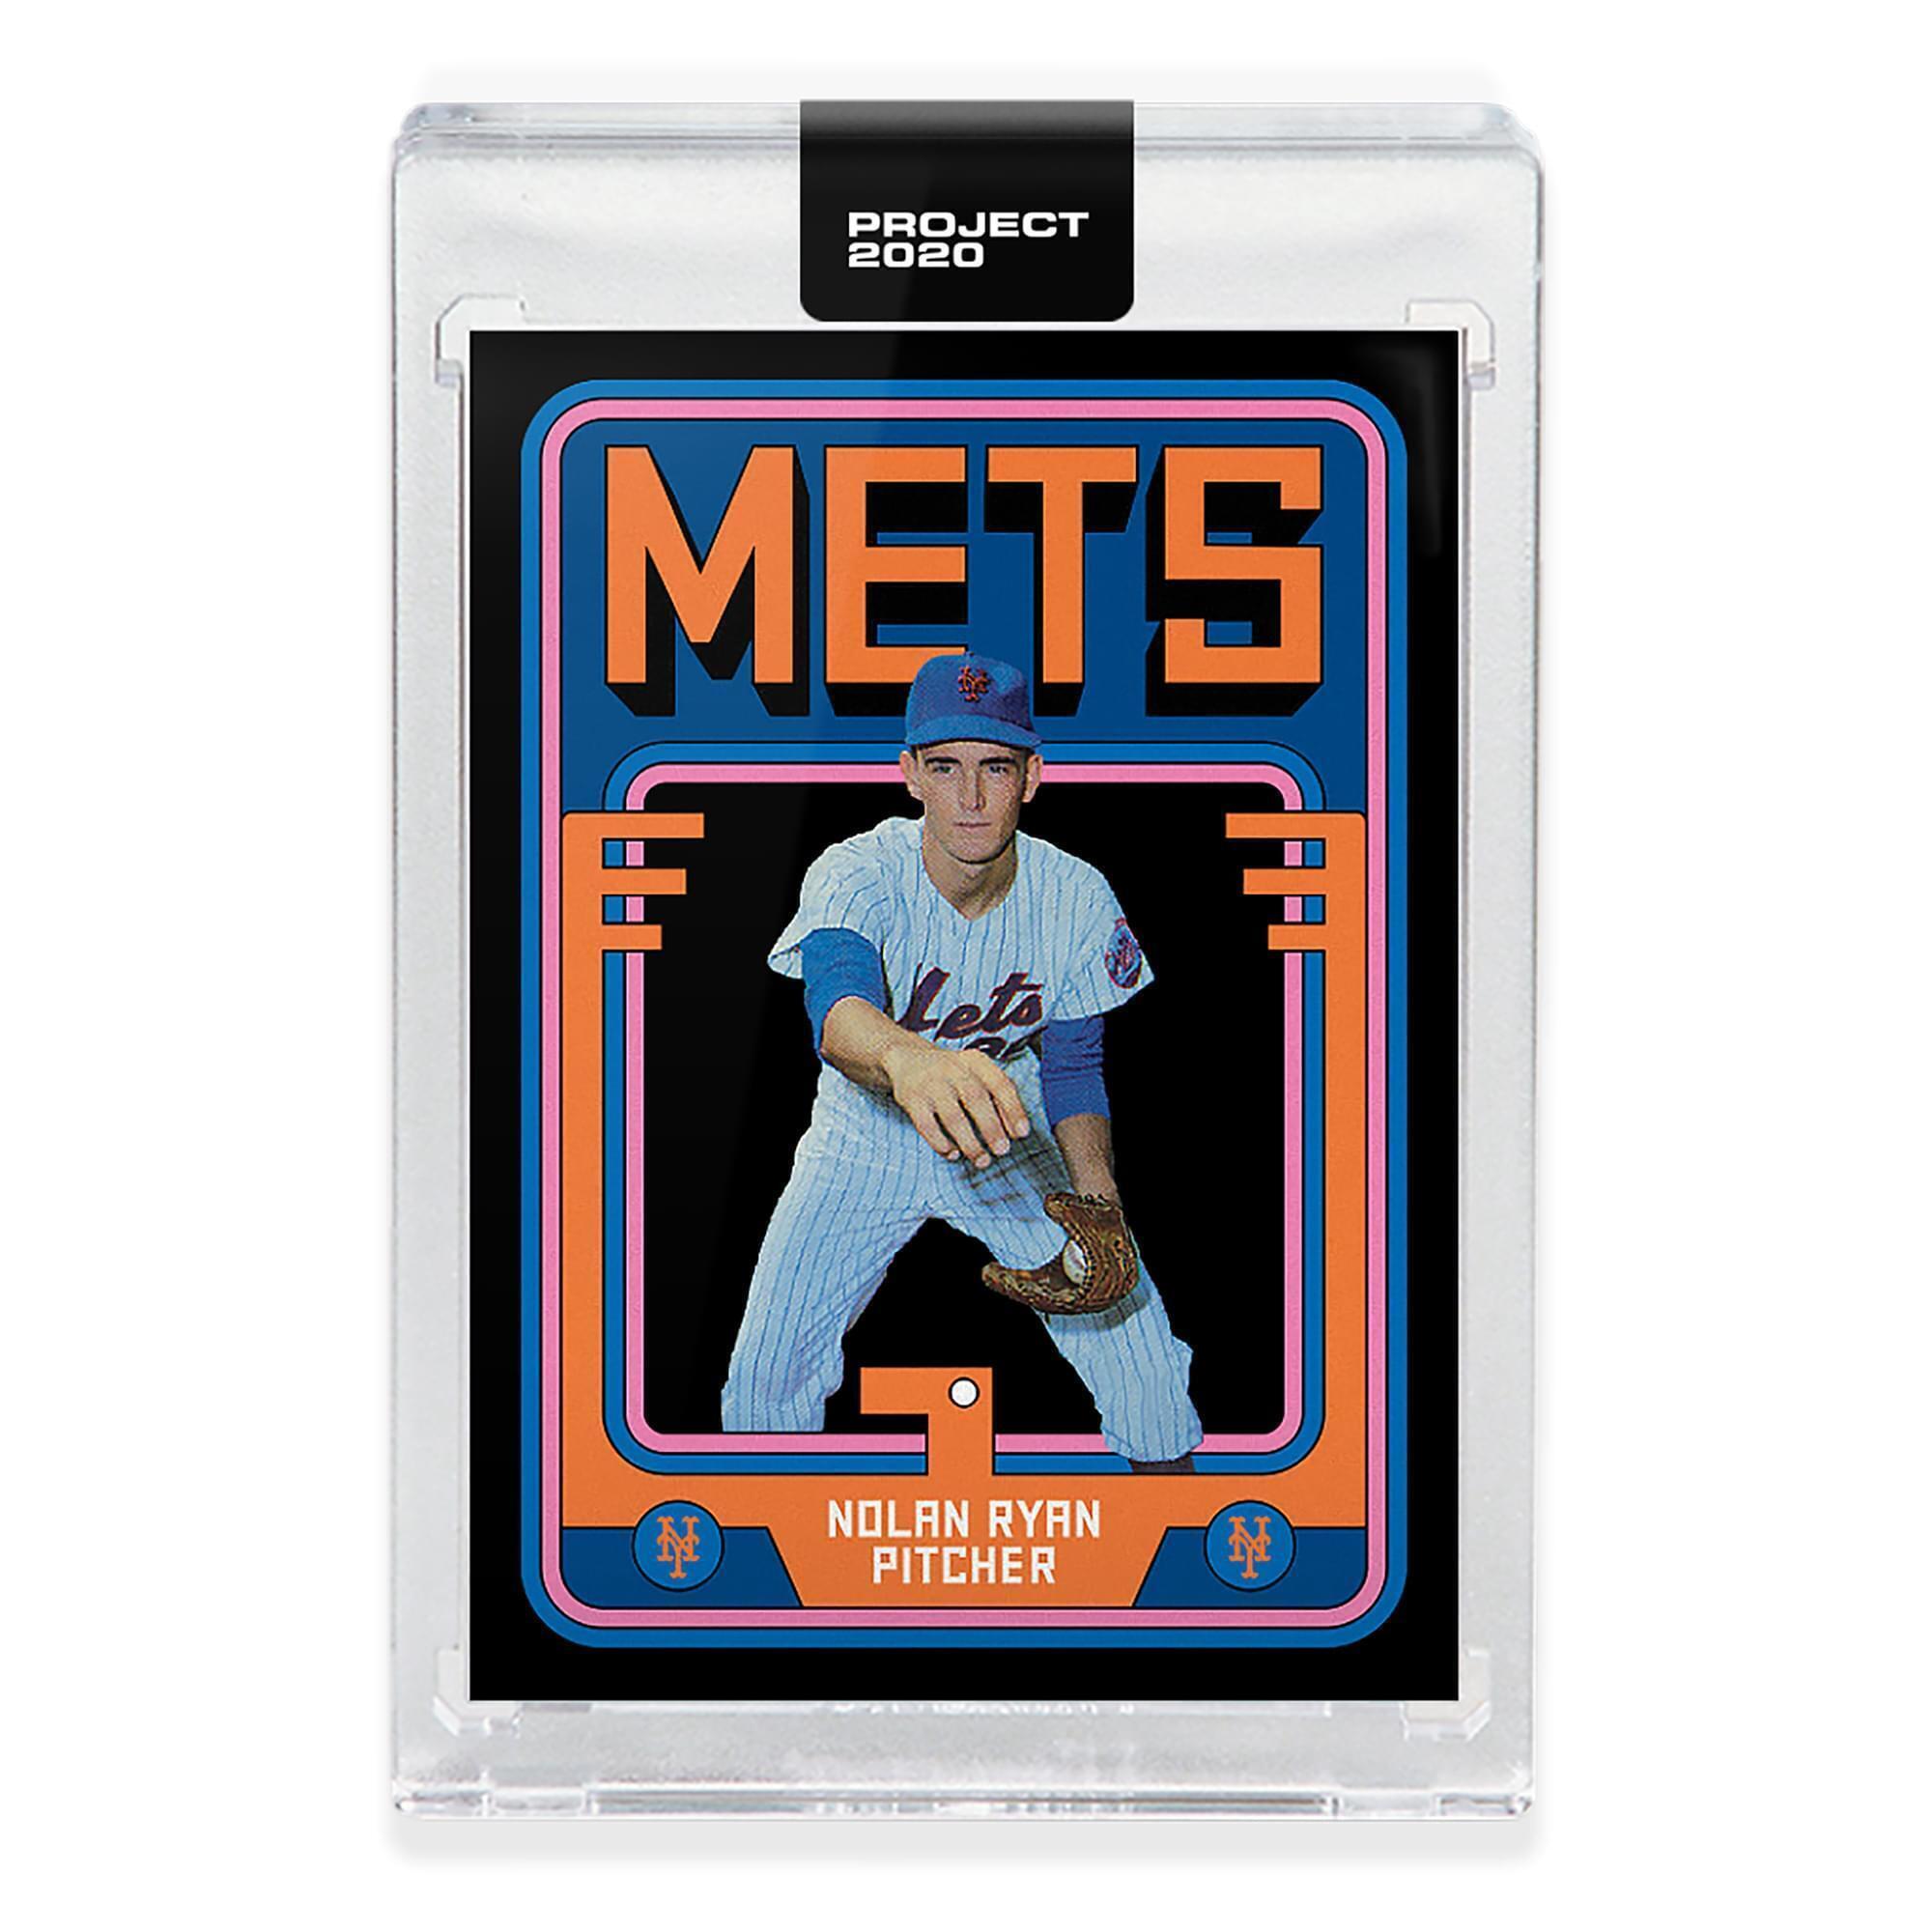 MLB Topps PROJECT 2020 Card 126 | 1969 Nolan Ryan by Grotesk